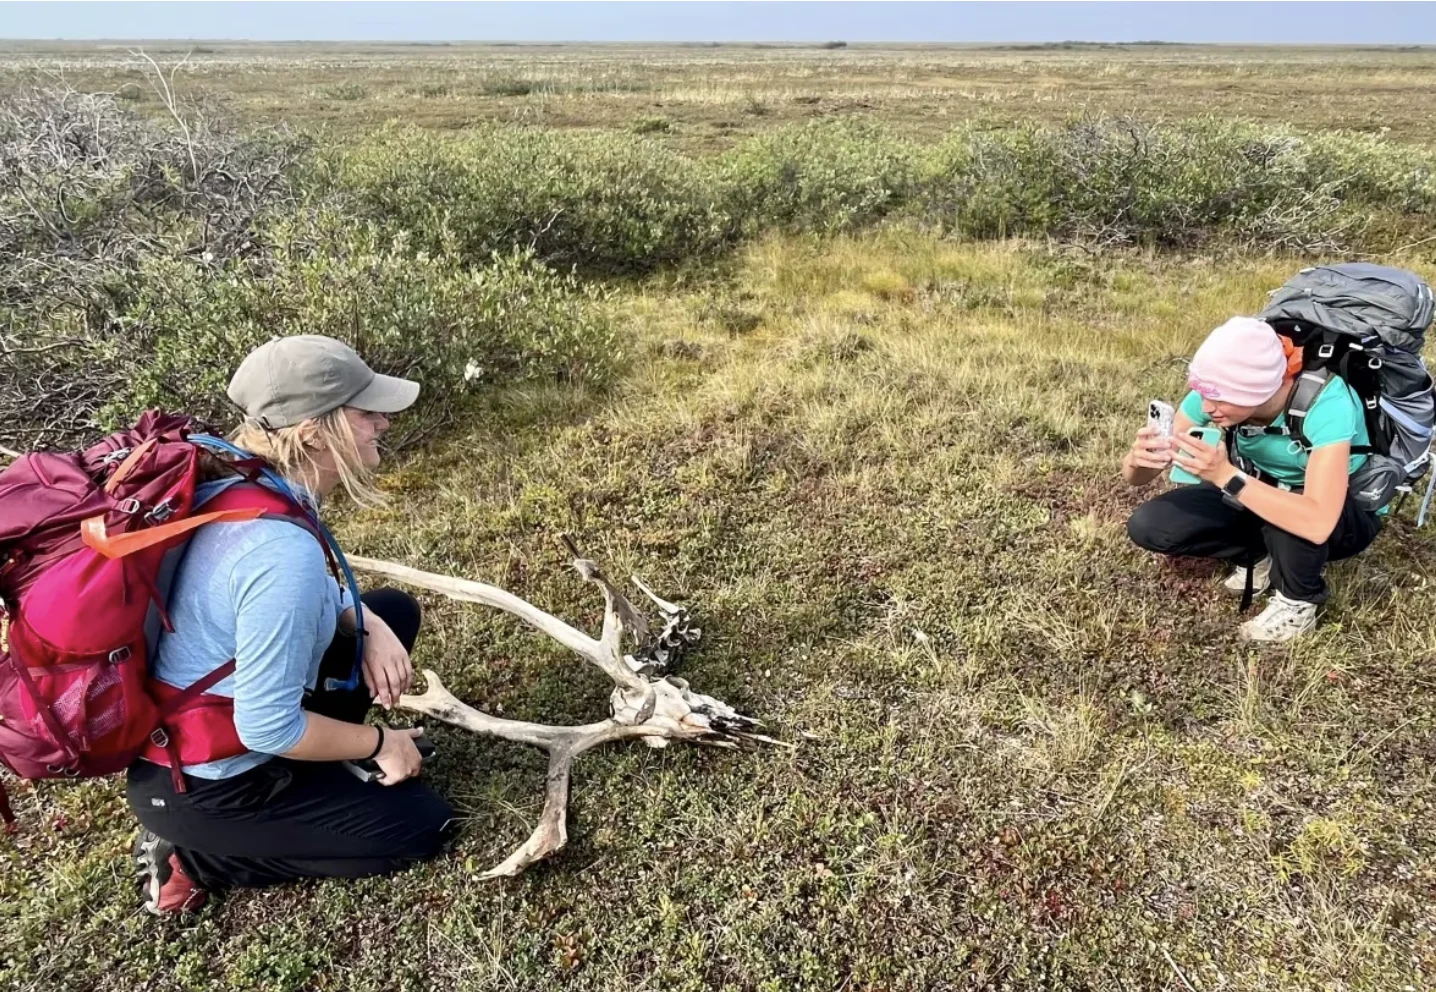 CBC: University of Saskatchewan student Hanna Weflen poses for classmate Jocelyn Gorniak during a hike within Wapusk National Park. Students, scientists and park staff are among the only people who can visit the interior of the park. (Bartley Kives/CBC)